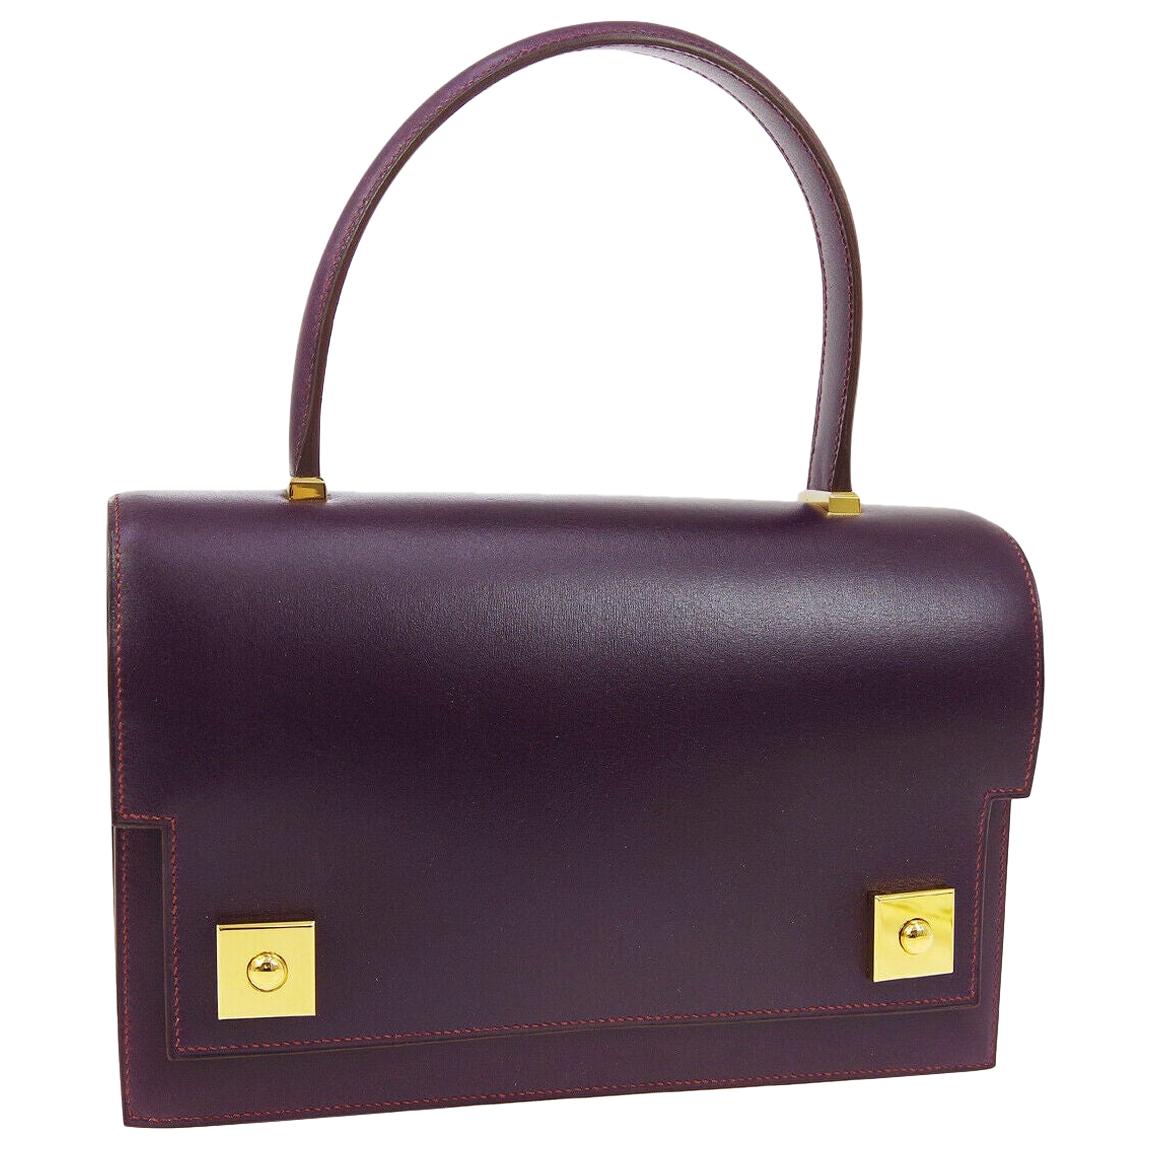 Hermes Purple Leather Gold Evening Kelly Style Top Handle Satchel Bag in Box 